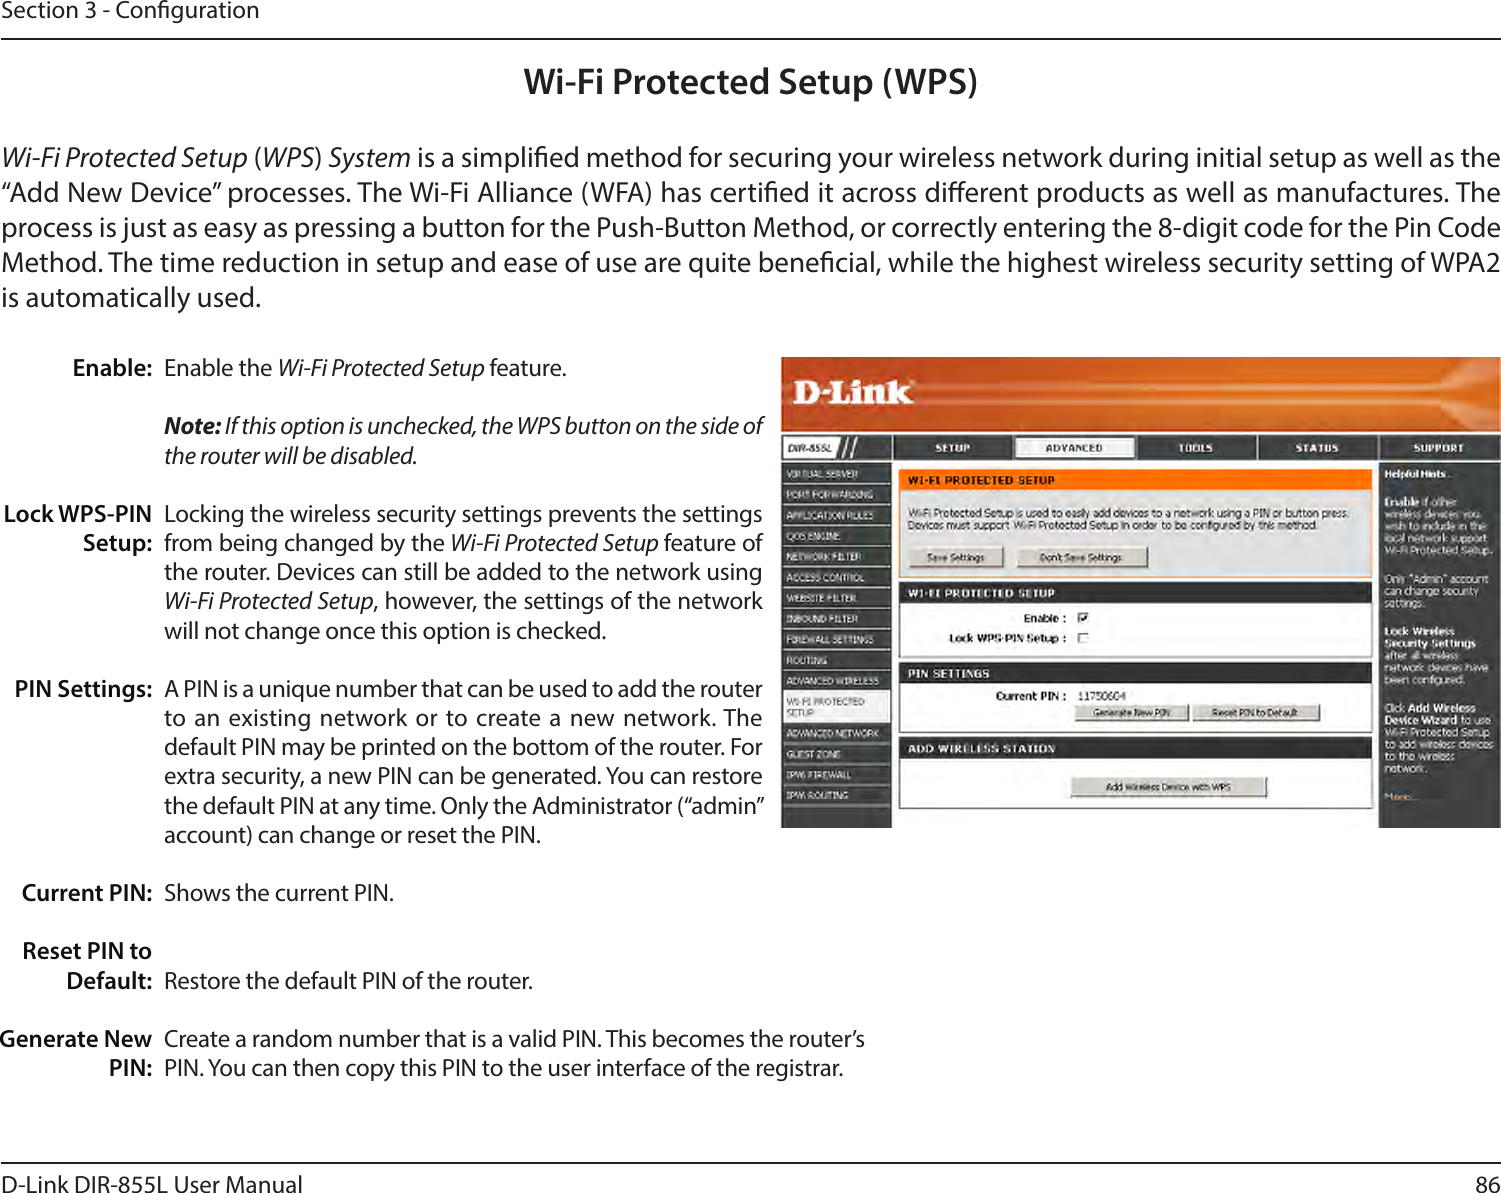 86D-Link DIR-855L User ManualSection 3 - CongurationWi-Fi Protected Setup (WPS)Enable the Wi-Fi Protected Setup feature. Note: If this option is unchecked, the WPS button on the side of the router will be disabled.Locking the wireless security settings prevents the settings from being changed by the Wi-Fi Protected Setup feature of the router. Devices can still be added to the network using Wi-Fi Protected Setup, however, the settings of the network will not change once this option is checked.A PIN is a unique number that can be used to add the router to an existing network or to create a new network. The default PIN may be printed on the bottom of the router. For extra security, a new PIN can be generated. You can restore the default PIN at any time. Only the Administrator (“admin” account) can change or reset the PIN.Shows the current PIN. Restore the default PIN of the router. Create a random number that is a valid PIN. This becomes the router’s PIN. You can then copy this PIN to the user interface of the registrar.Enable:Lock WPS-PIN Setup:PIN Settings:Current PIN:Reset PIN to Default:Generate New PIN:Wi-Fi Protected Setup (WPS) System is a simplied method for securing your wireless network during initial setup as well as the “Add New Device” processes. The Wi-Fi Alliance (WFA) has certied it across dierent products as well as manufactures. The process is just as easy as pressing a button for the Push-Button Method, or correctly entering the 8-digit code for the Pin Code Method. The time reduction in setup and ease of use are quite benecial, while the highest wireless security setting of WPA2 is automatically used.